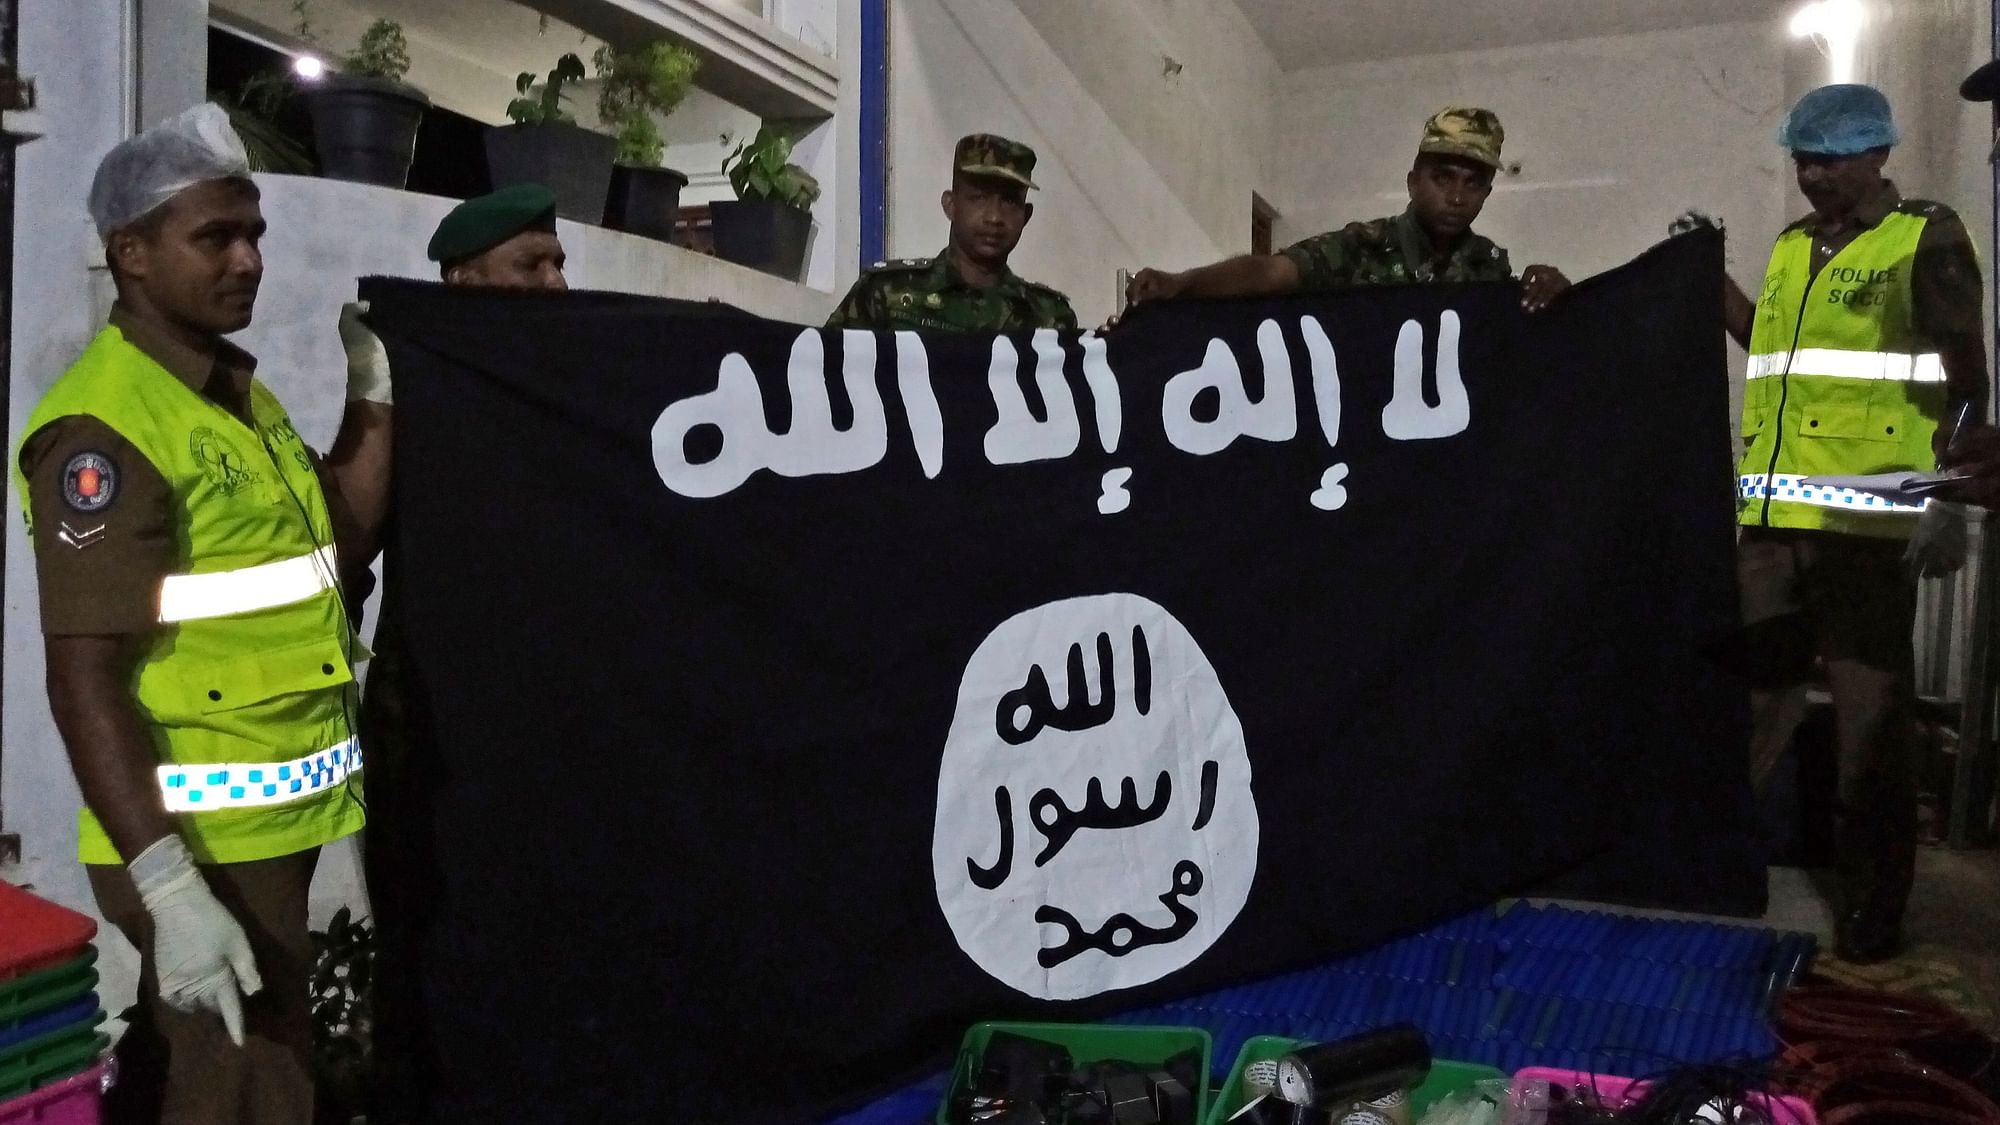 On 26 April 2019, Sri Lankan police officers show ISIS flag recovered from alleged hideout of militants, in Kalmunai, in Eastern Sri Lanka. Image used for representational purposes.